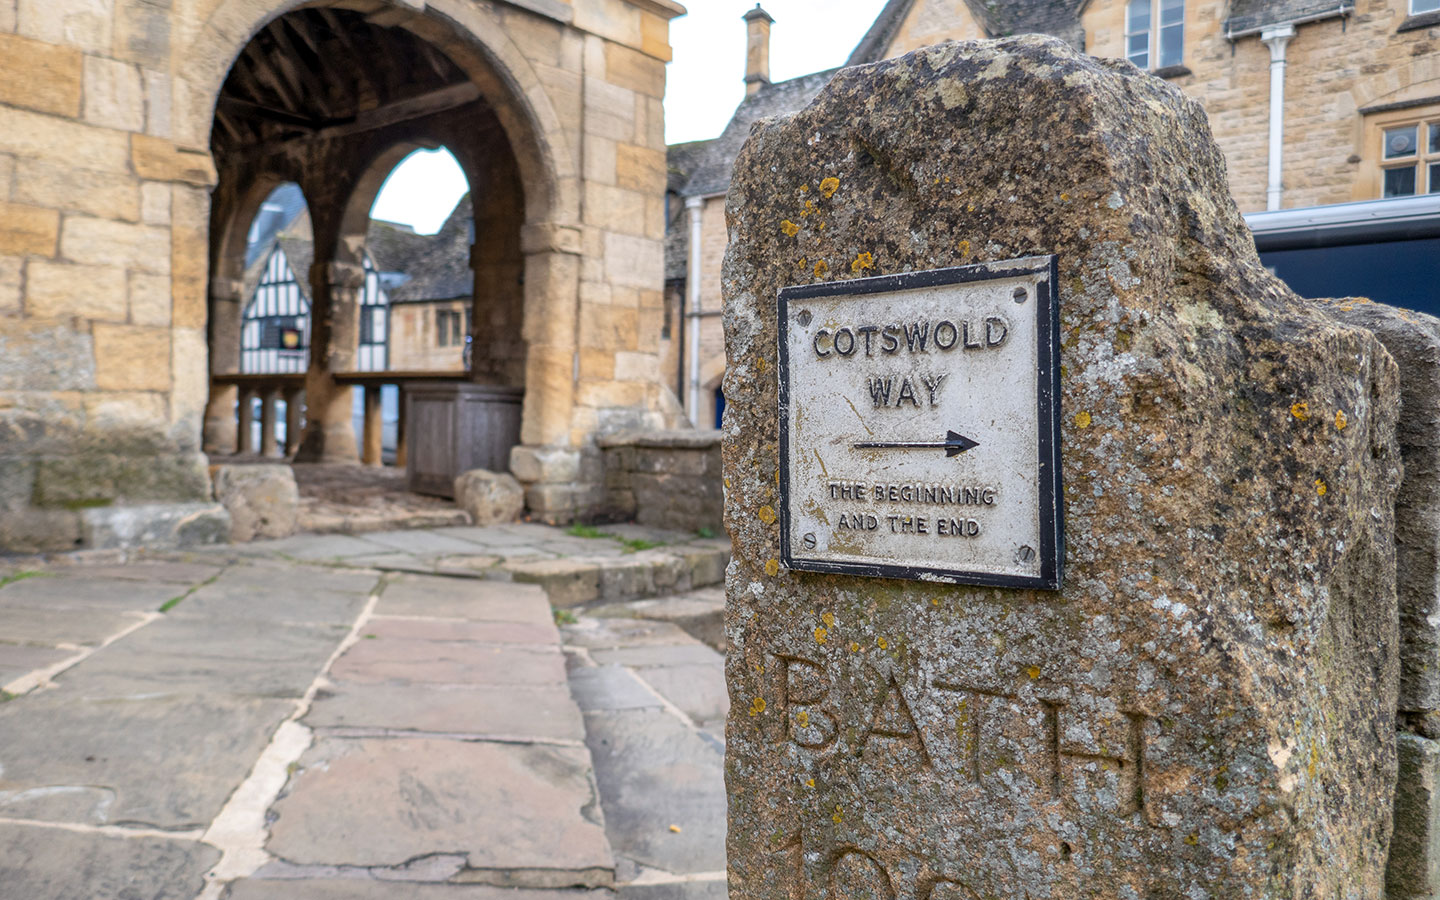 Cotswold Way marker stone in Chipping Campden